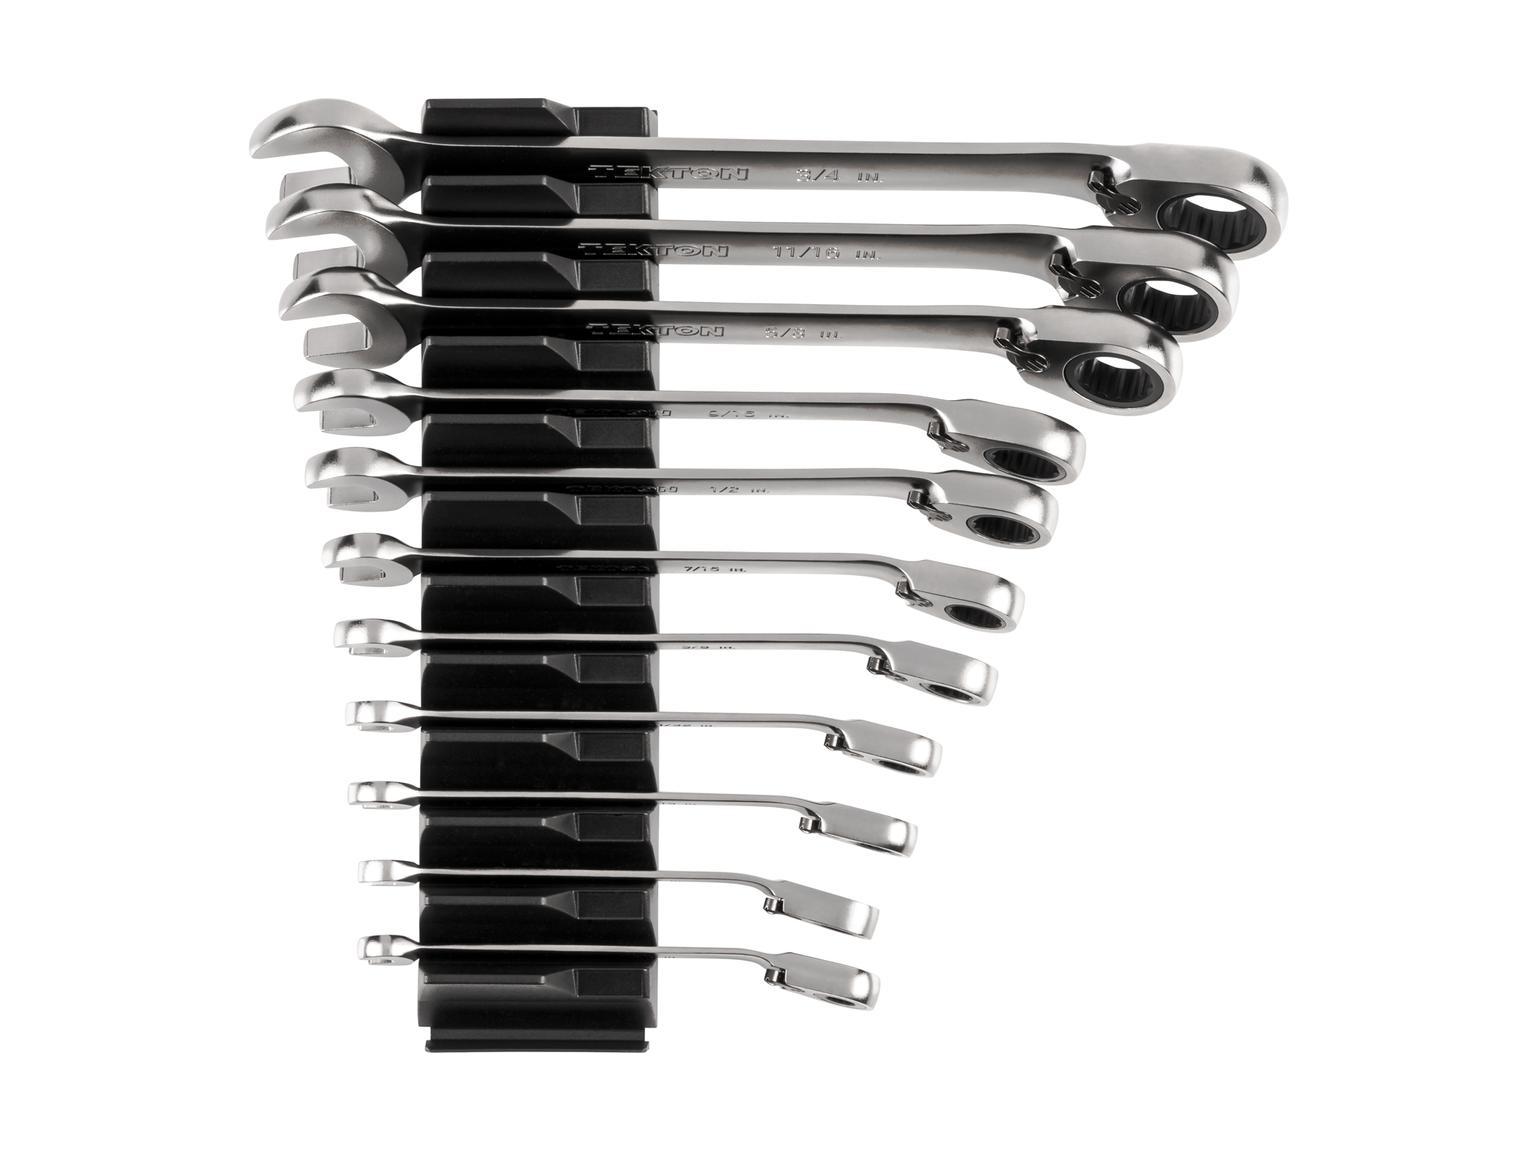 Reversible 12-Point Ratcheting Combination Wrench Set, 11-Piece (Modular Wrench Organizer)